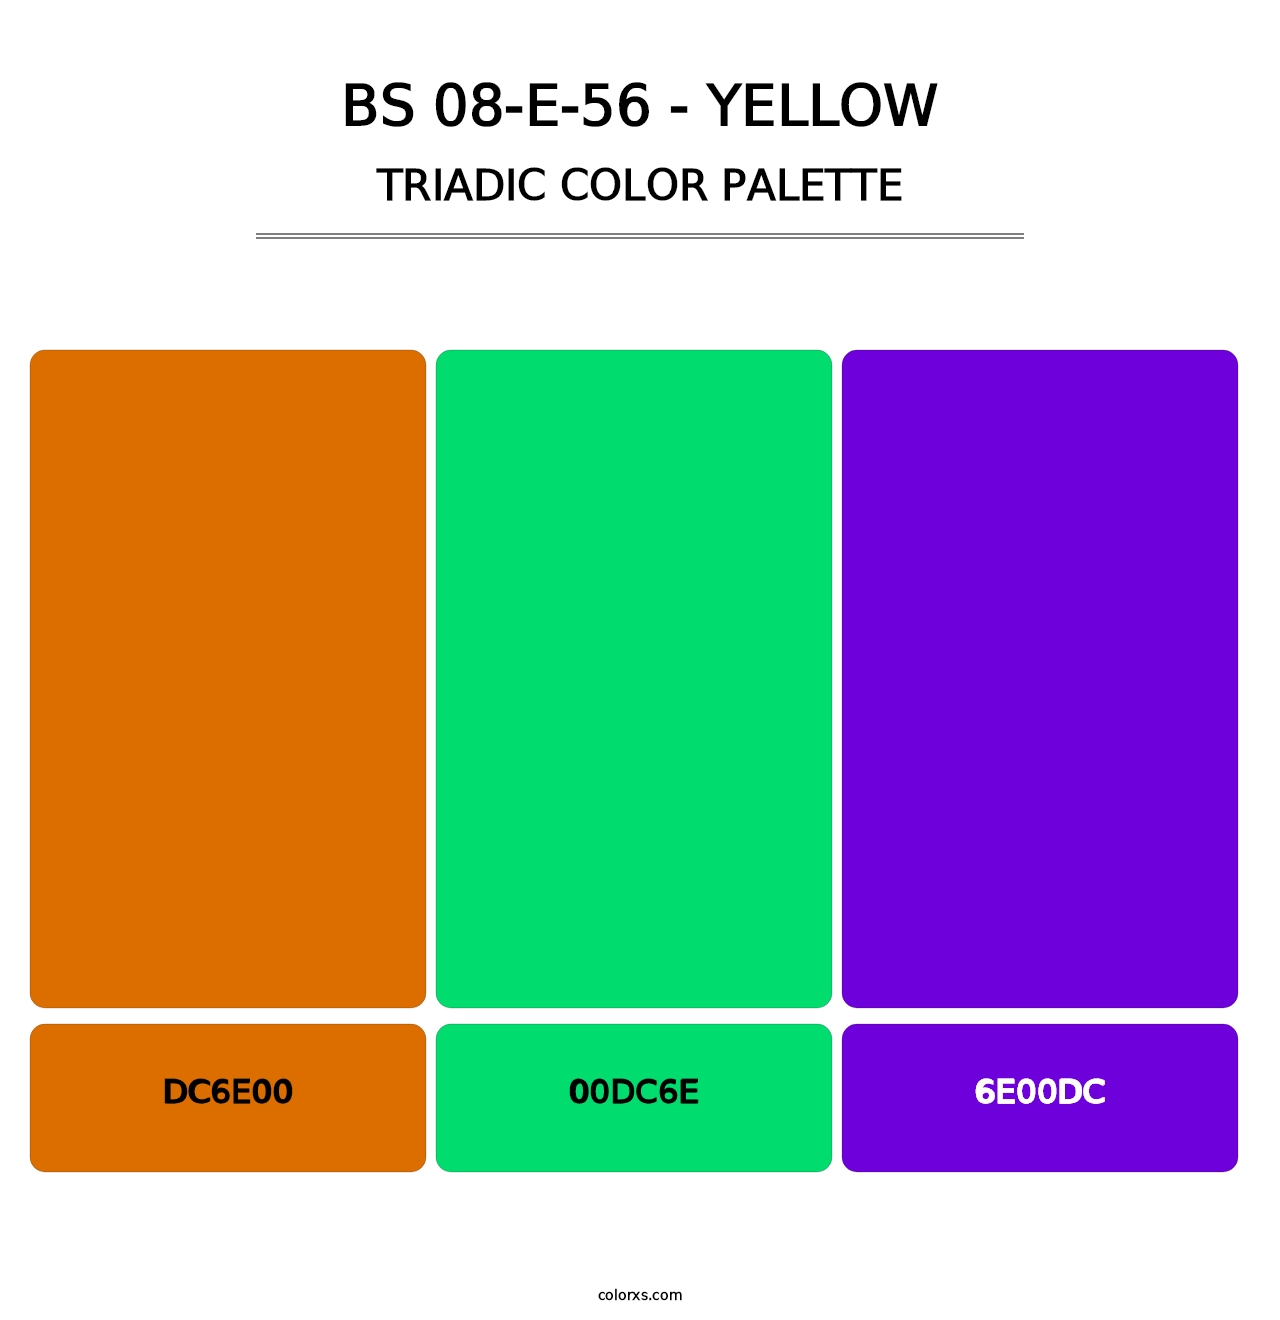 BS 08-E-56 - Yellow - Triadic Color Palette